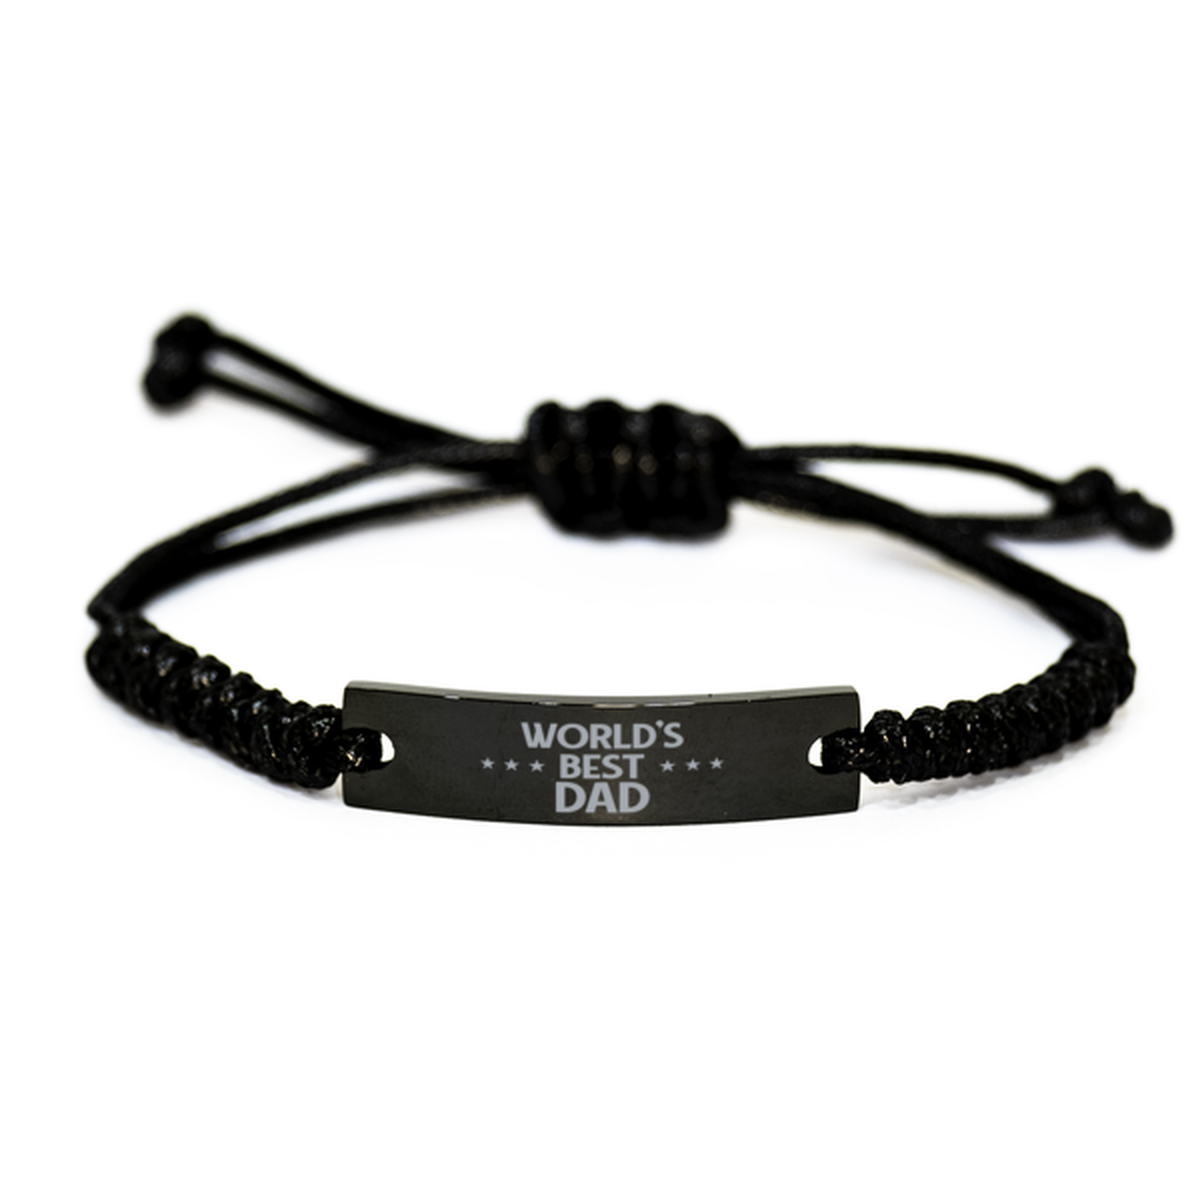 World's Best Dad Gifts, Funny Engraved Rope Bracelet For Dad, Birthday Family Gifts For Men